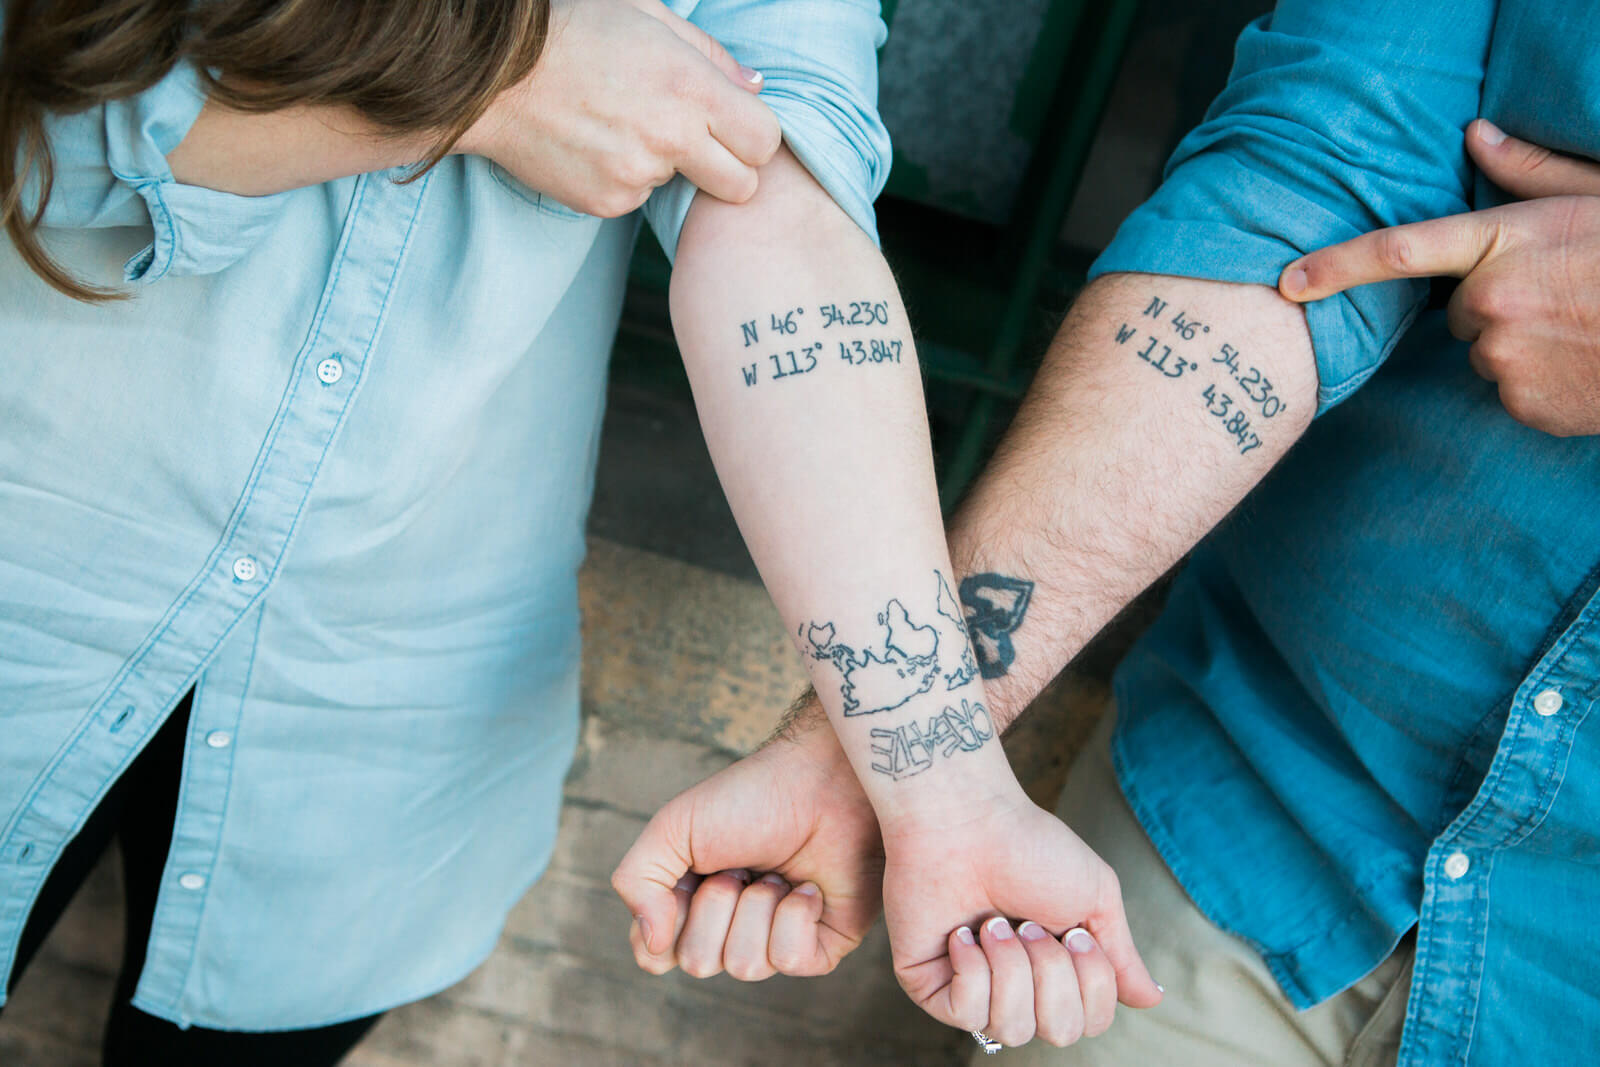 An engaged couple shows off their matching tattoos during their engagement session in Missoula Montana